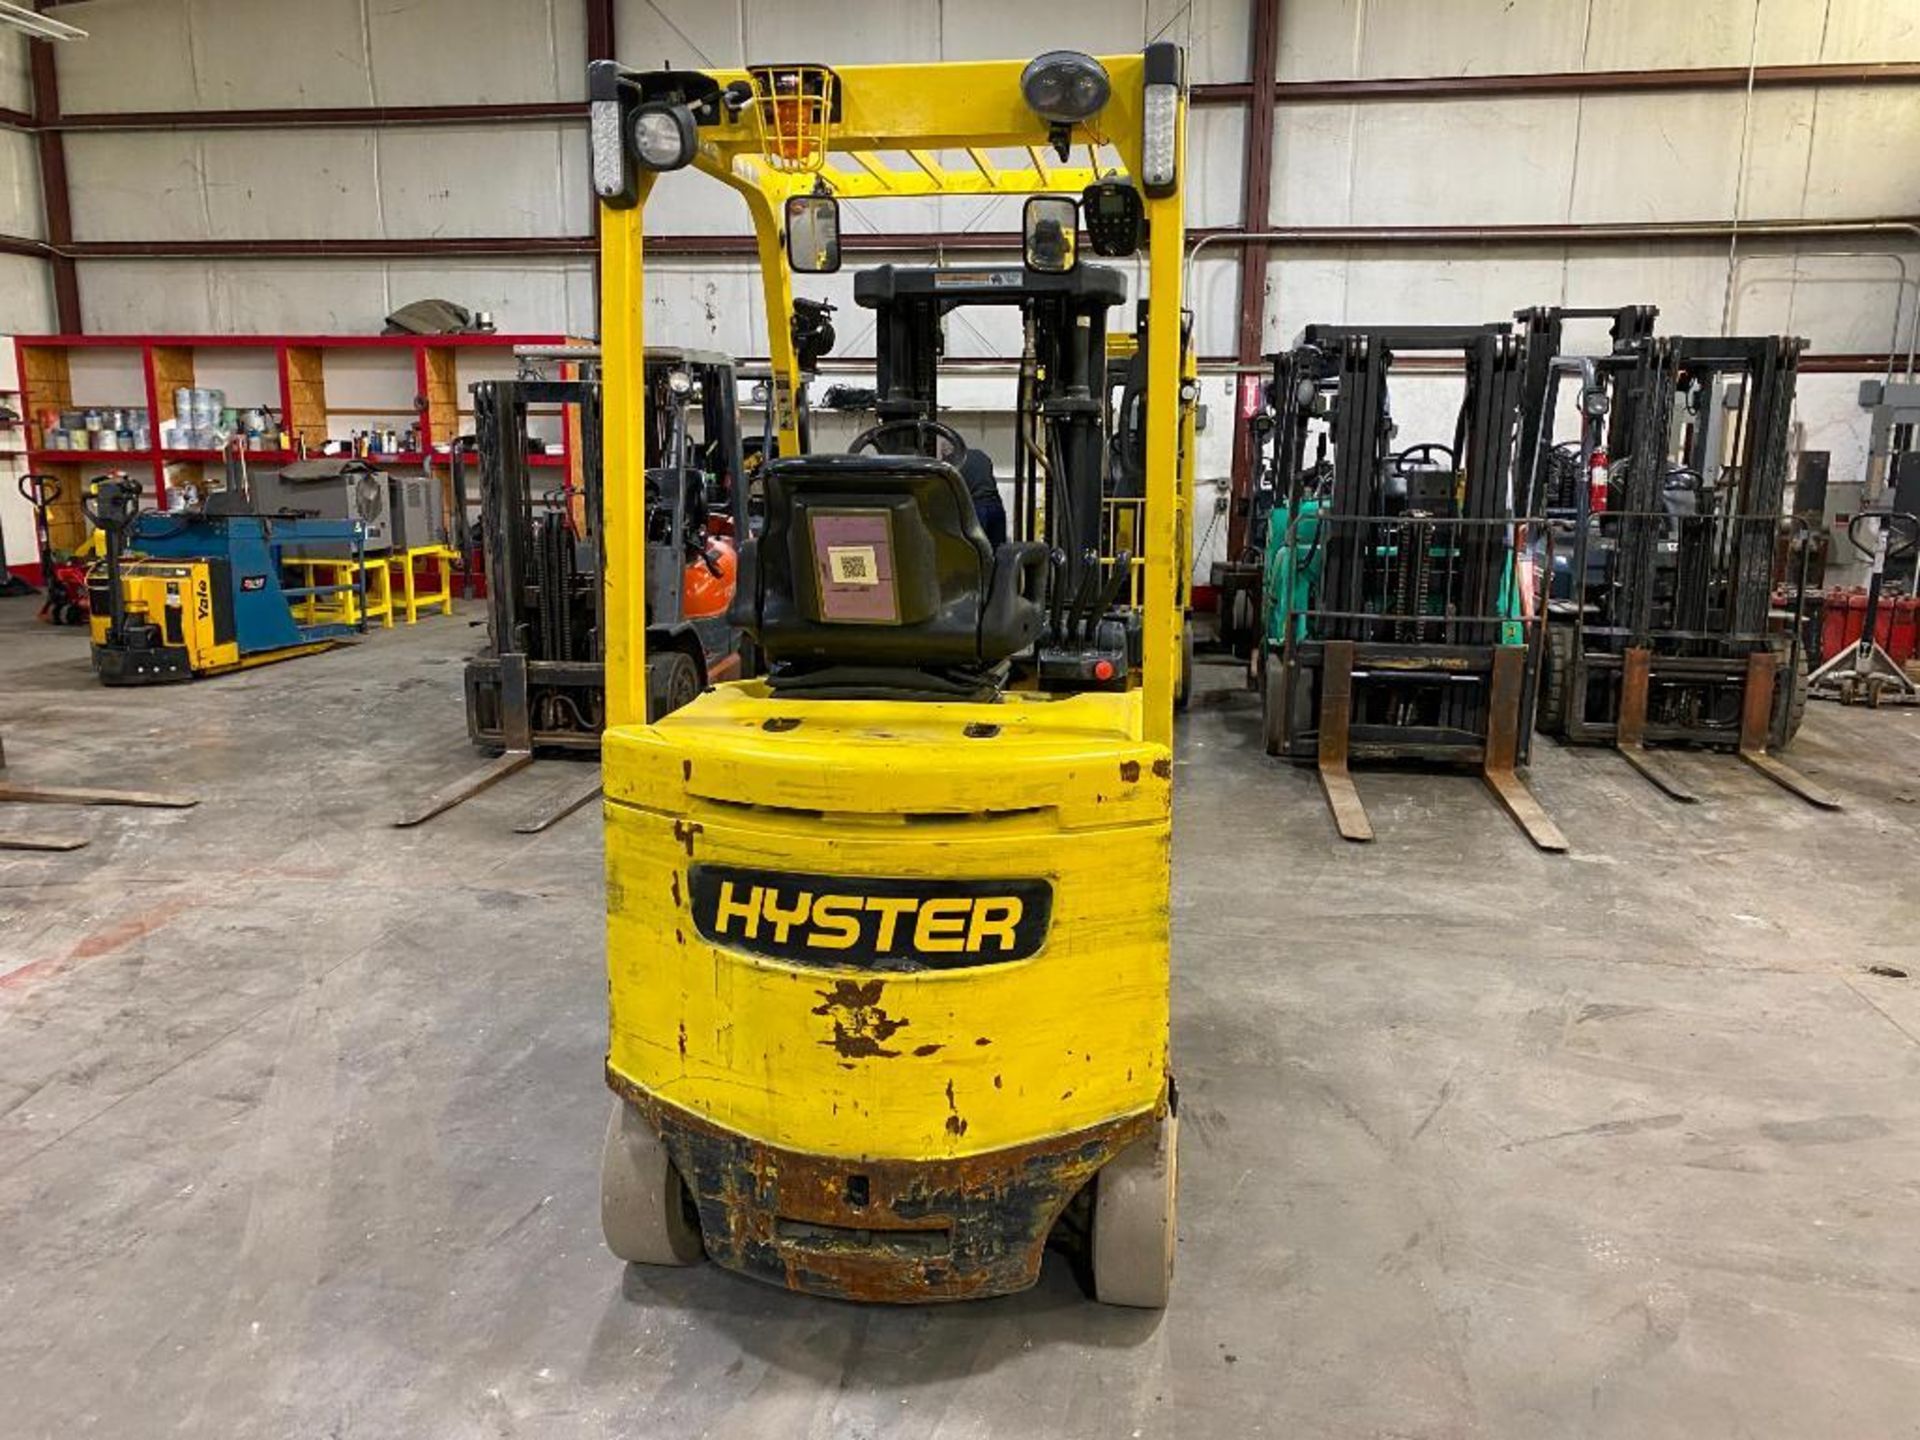 Hyster 5,500-LB. Capacity Forklift, Model E55XN-33, S/N A268N02370G, 48 Volt Battery, Cushion Tires, - Image 4 of 5